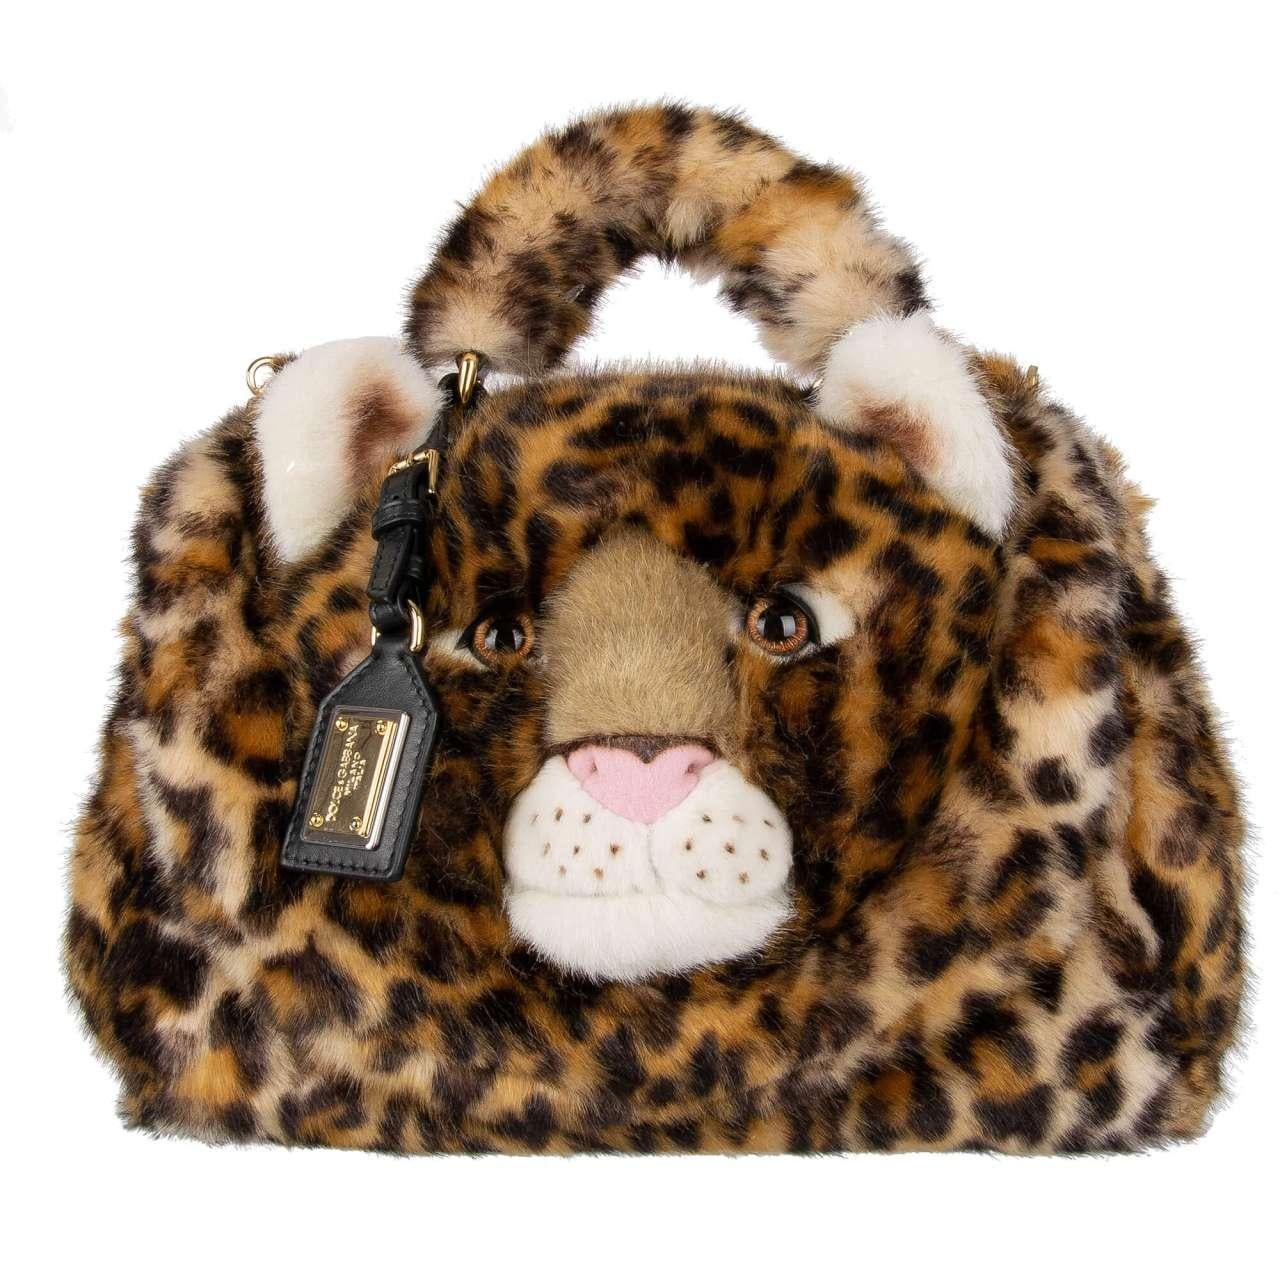 - Calf leather and faux fur Tote / Shoulder Bag SICILY in leopard print with leopard head embellished with logo plate pendant by DOLCE & GABBANA - New with Tag, Dustbag and Authenticity Card - Former RRP: EUR 1.350 - Material: 75% Modacrylic, 15%